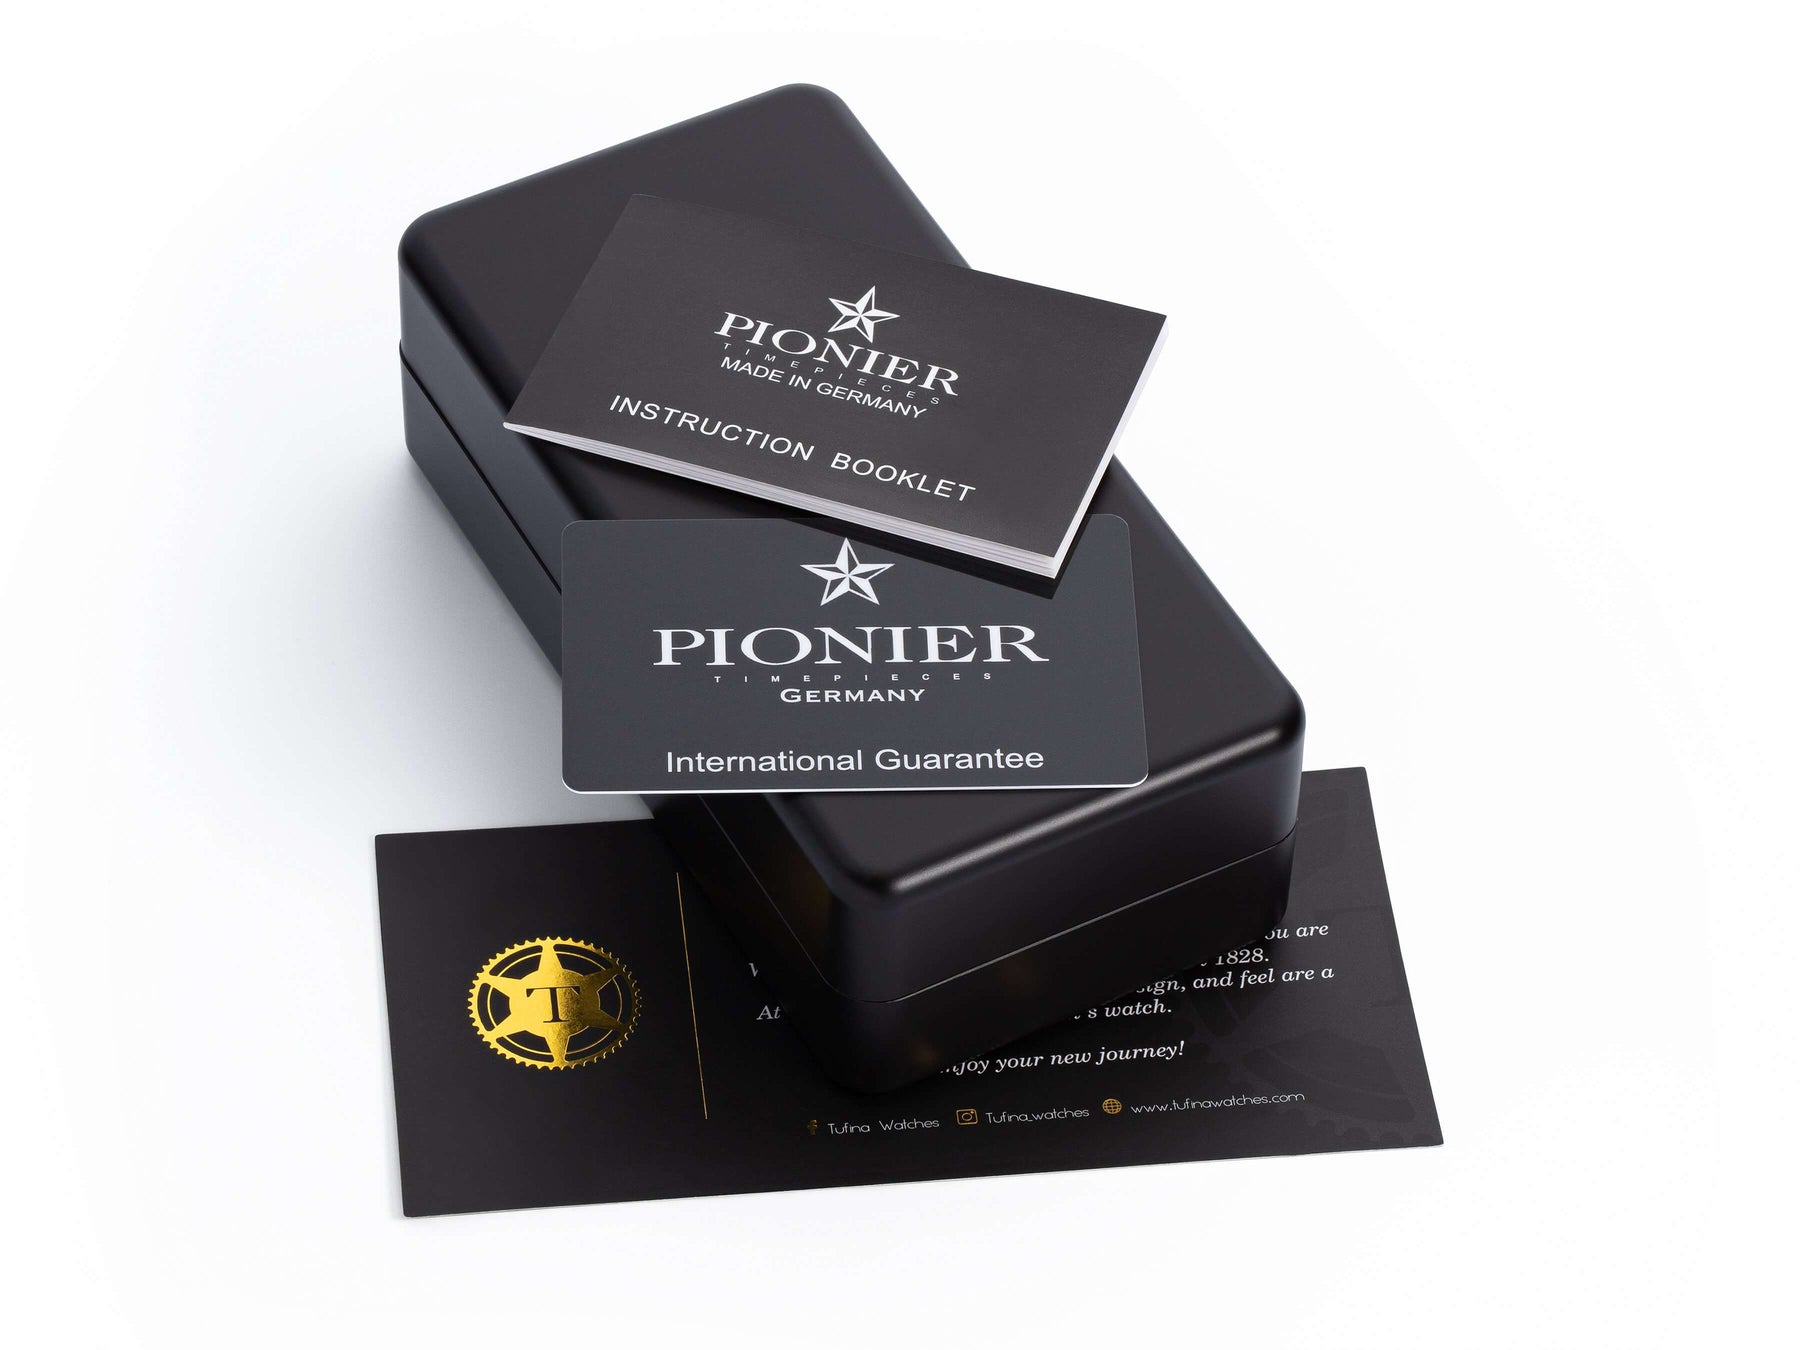 Original Pionier box with Instruction Booklet and International Guarantee cards.